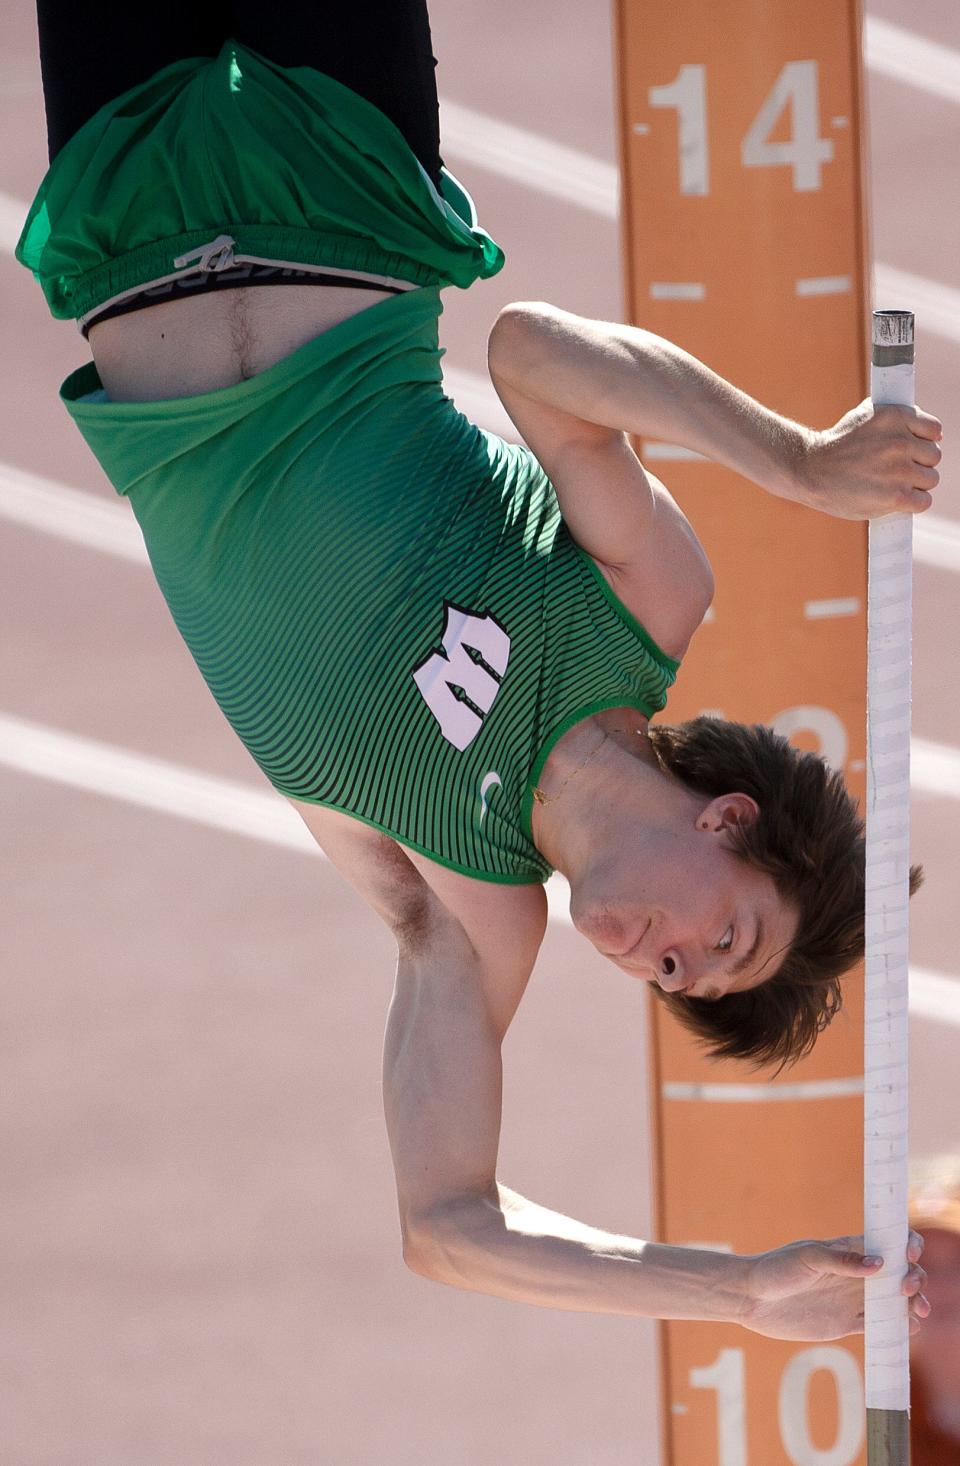 Woodsboro's Anthony Meacham competes in the Class 2A pole vault during the UIL State Track and Field meet, Friday, May 13, 2022, at Mike A. Myers Stadium in Austin.